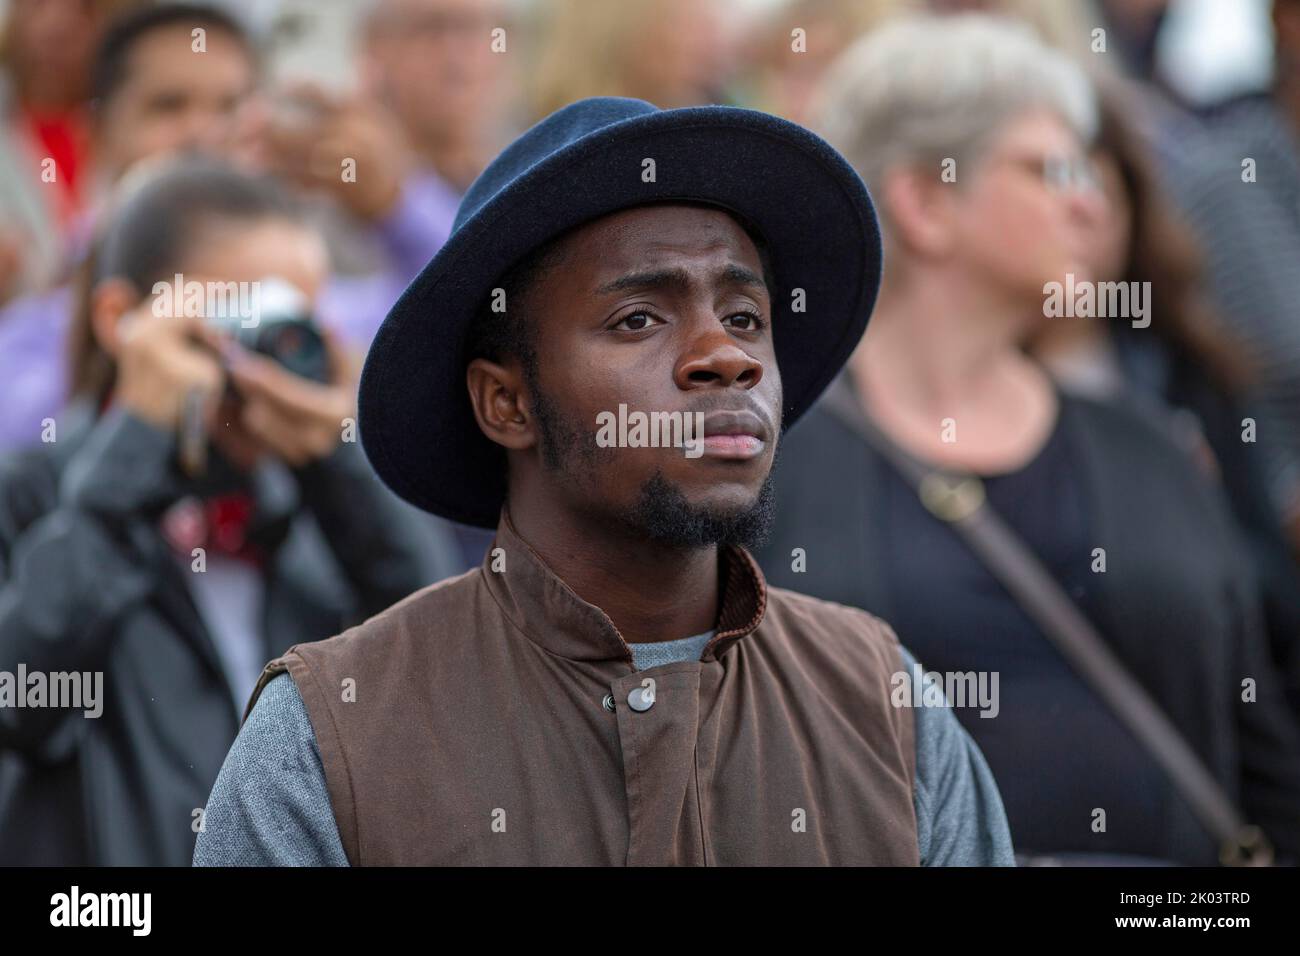 London, UK. 9th September 2022.People gather outside Buckingham Palace, London, following the death of Queen Elizabeth II on Thursday. Photo Horst A. Friedrichs Alamy Live News Stock Photo